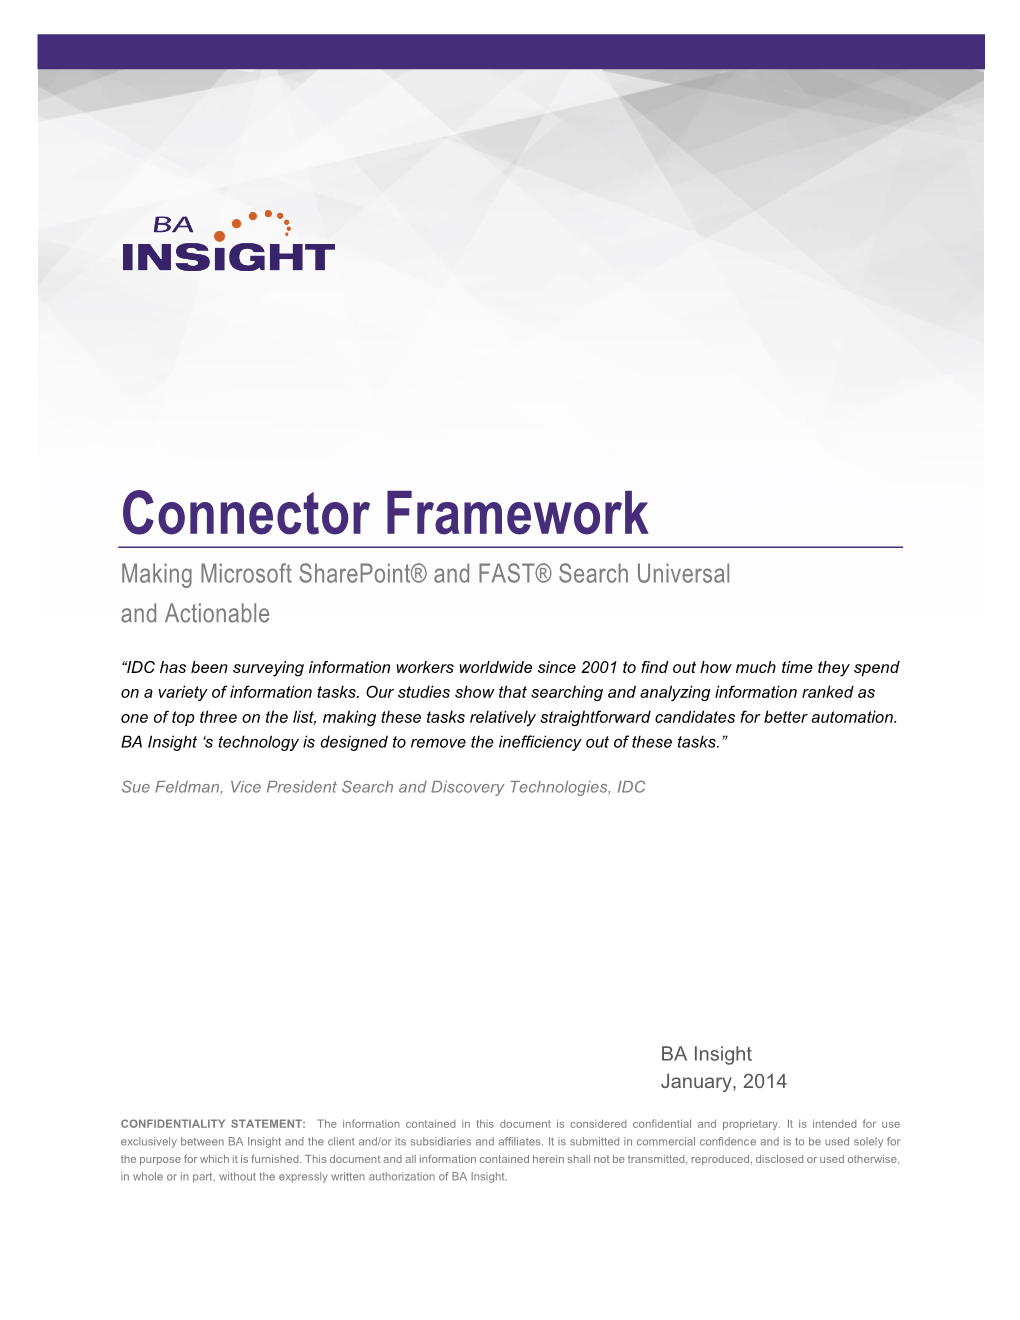 Connector Framework Making Microsoft Sharepoint® and FAST® Search Universal and Actionable